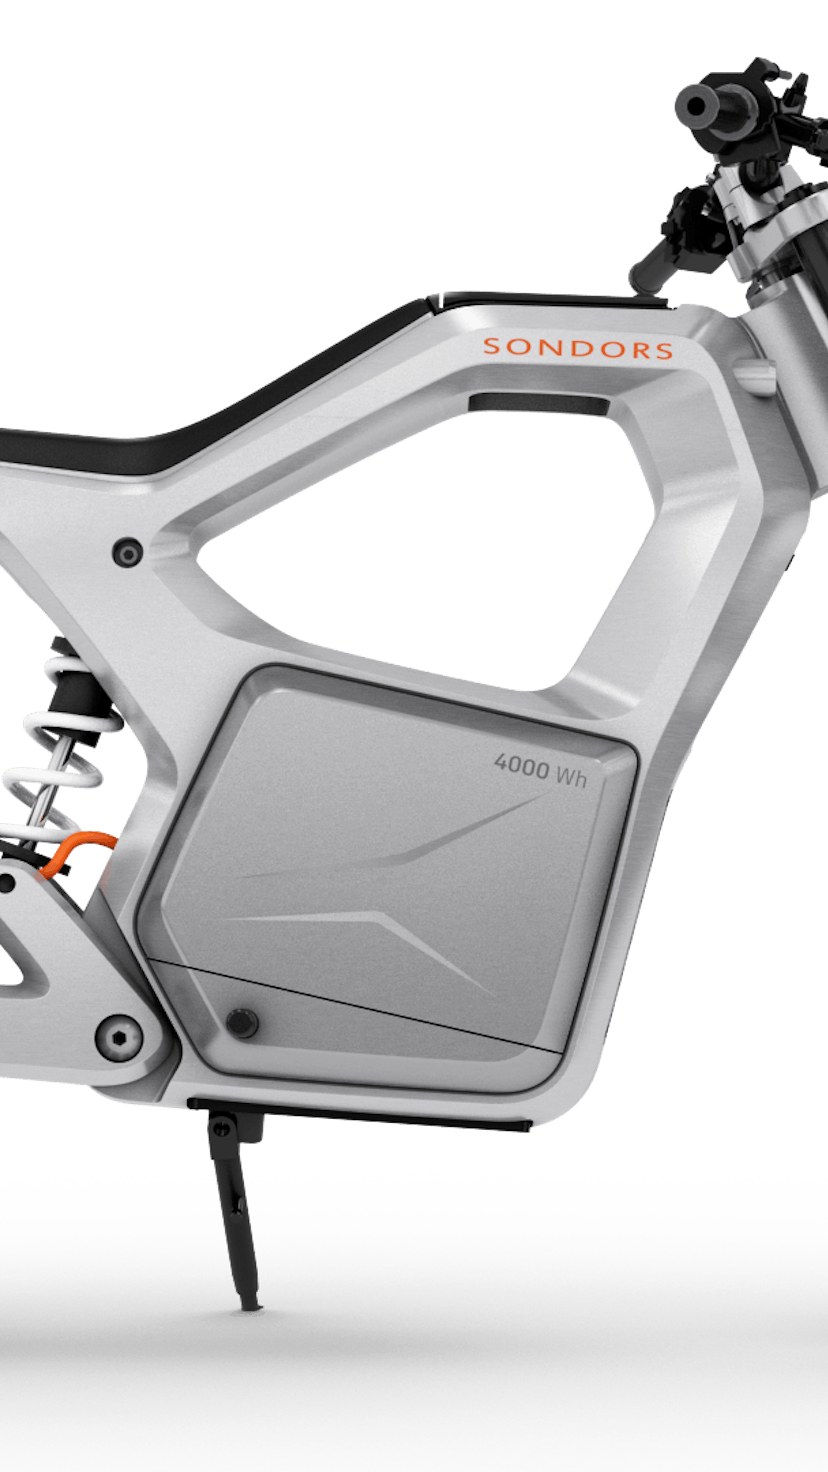 The Sondors Metacycle, an affordable electric motorcycle.